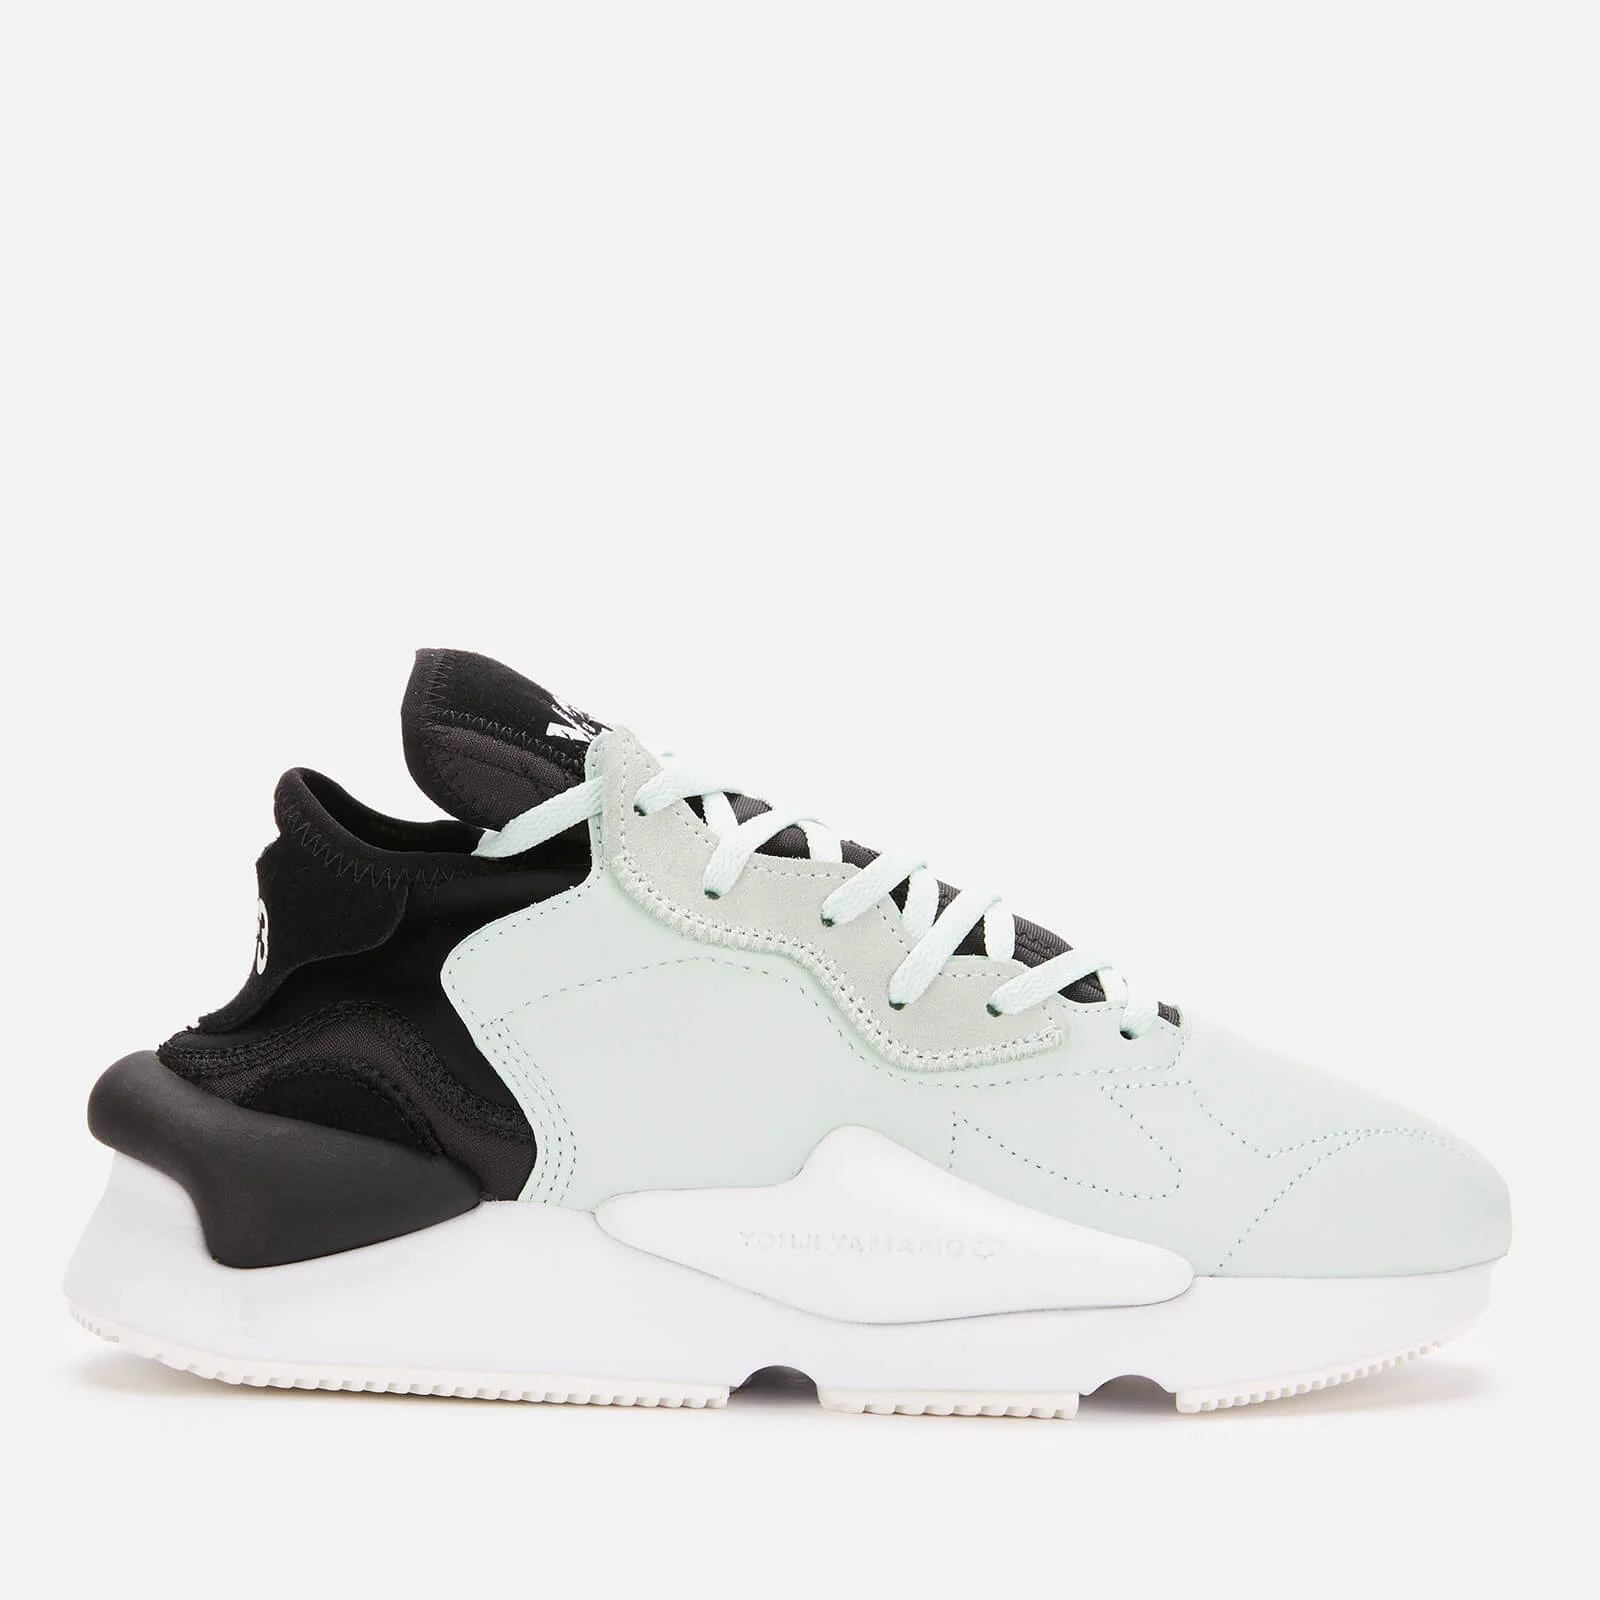 Y-3 Kaiwa Trainers - Salty Green Y-3/Core White Image 1